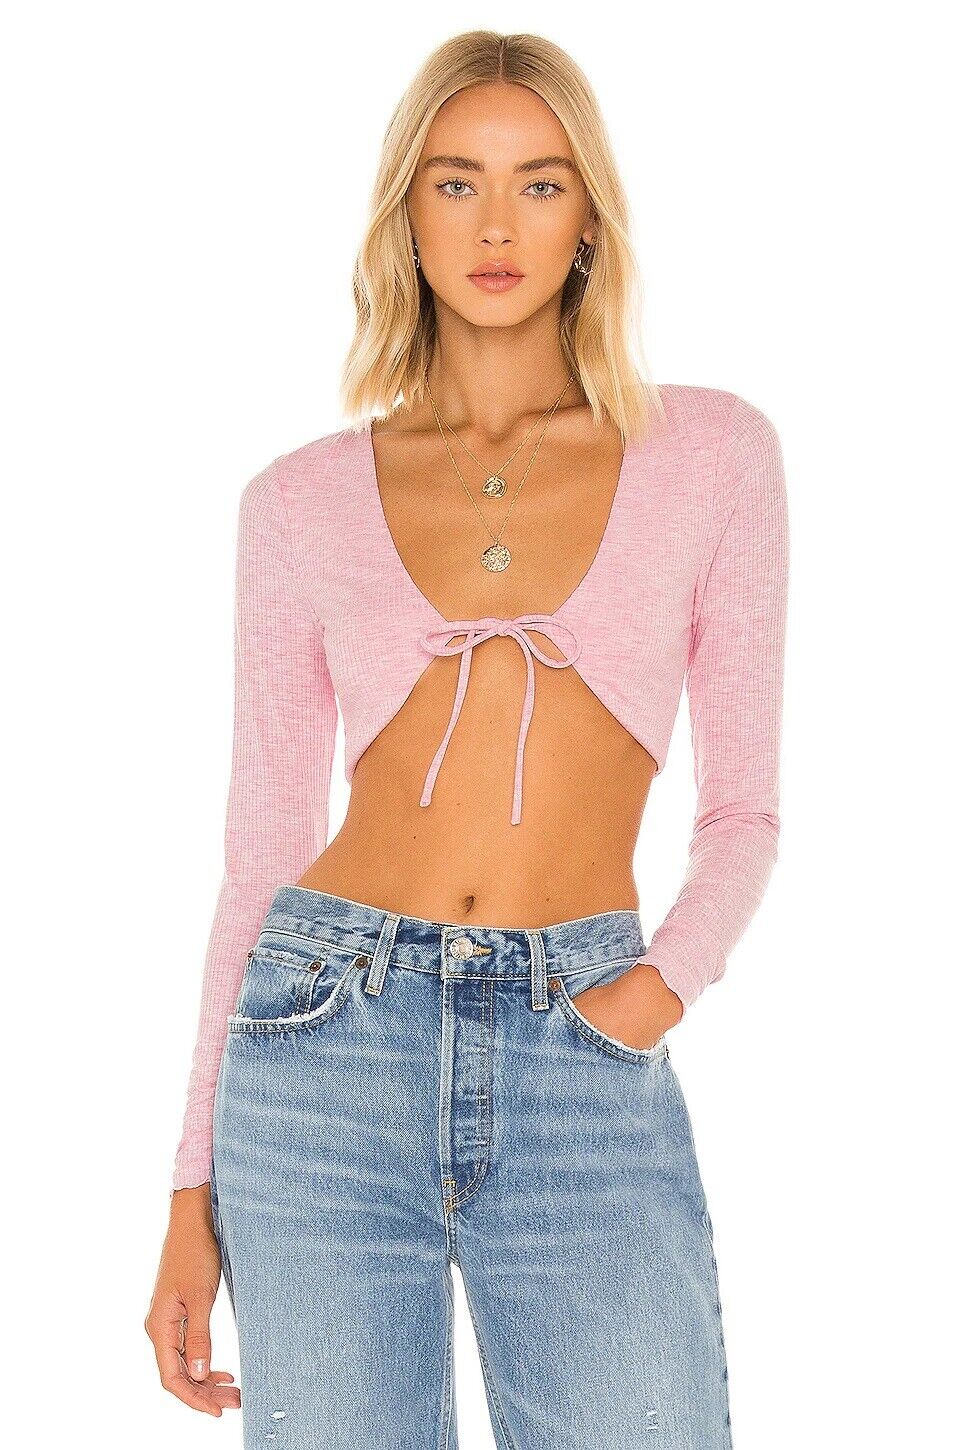 Lovers and Friends Edge Cropped Cardigan in Heathered Pink - size XS